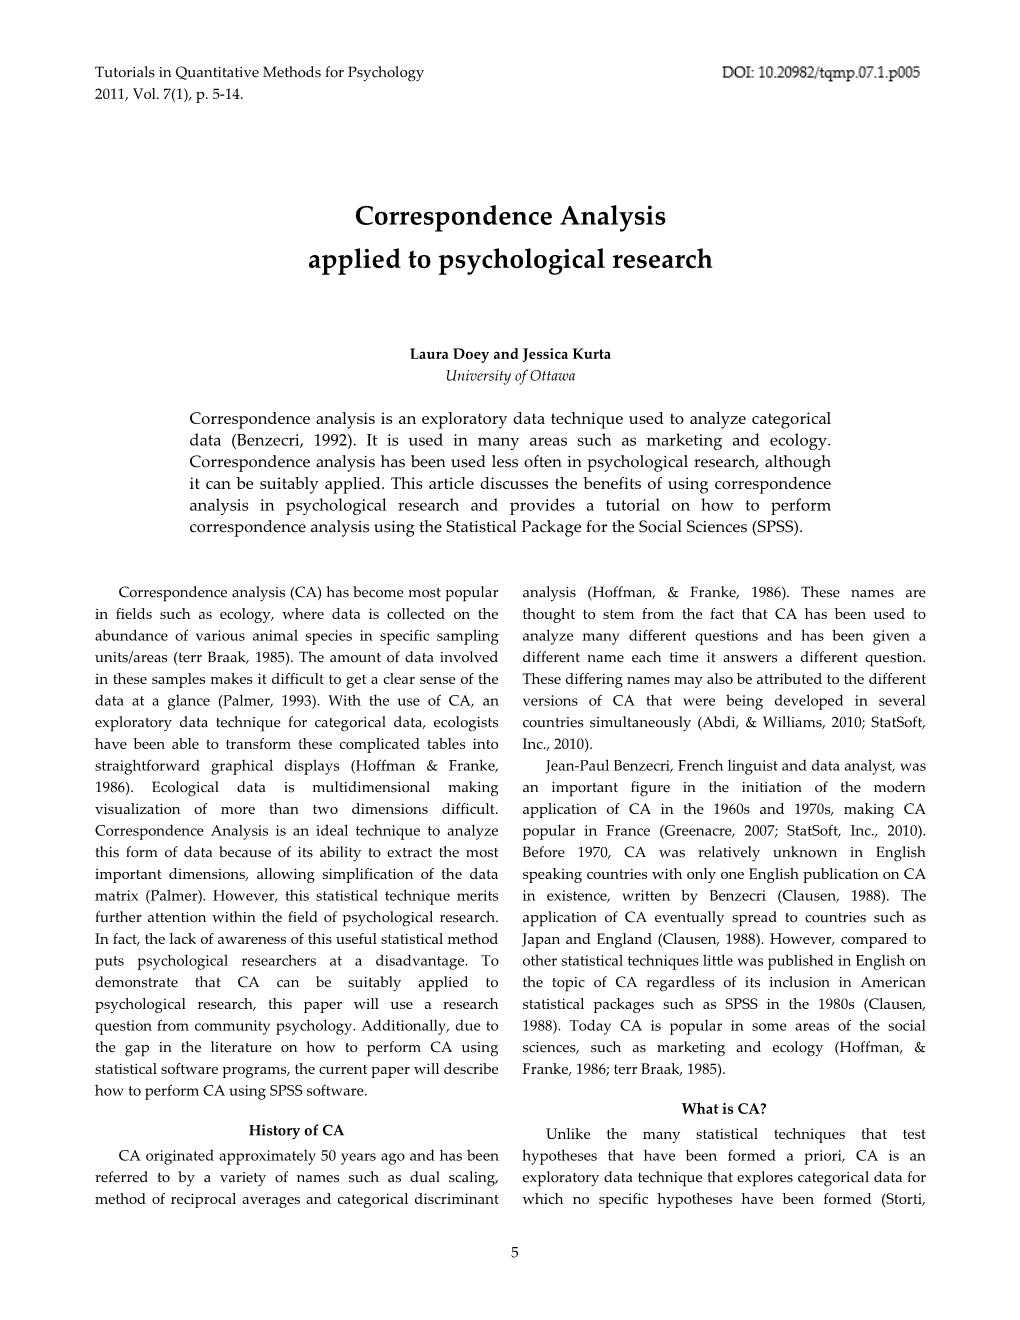 Correspondence Analysis Applied to Psychological Research